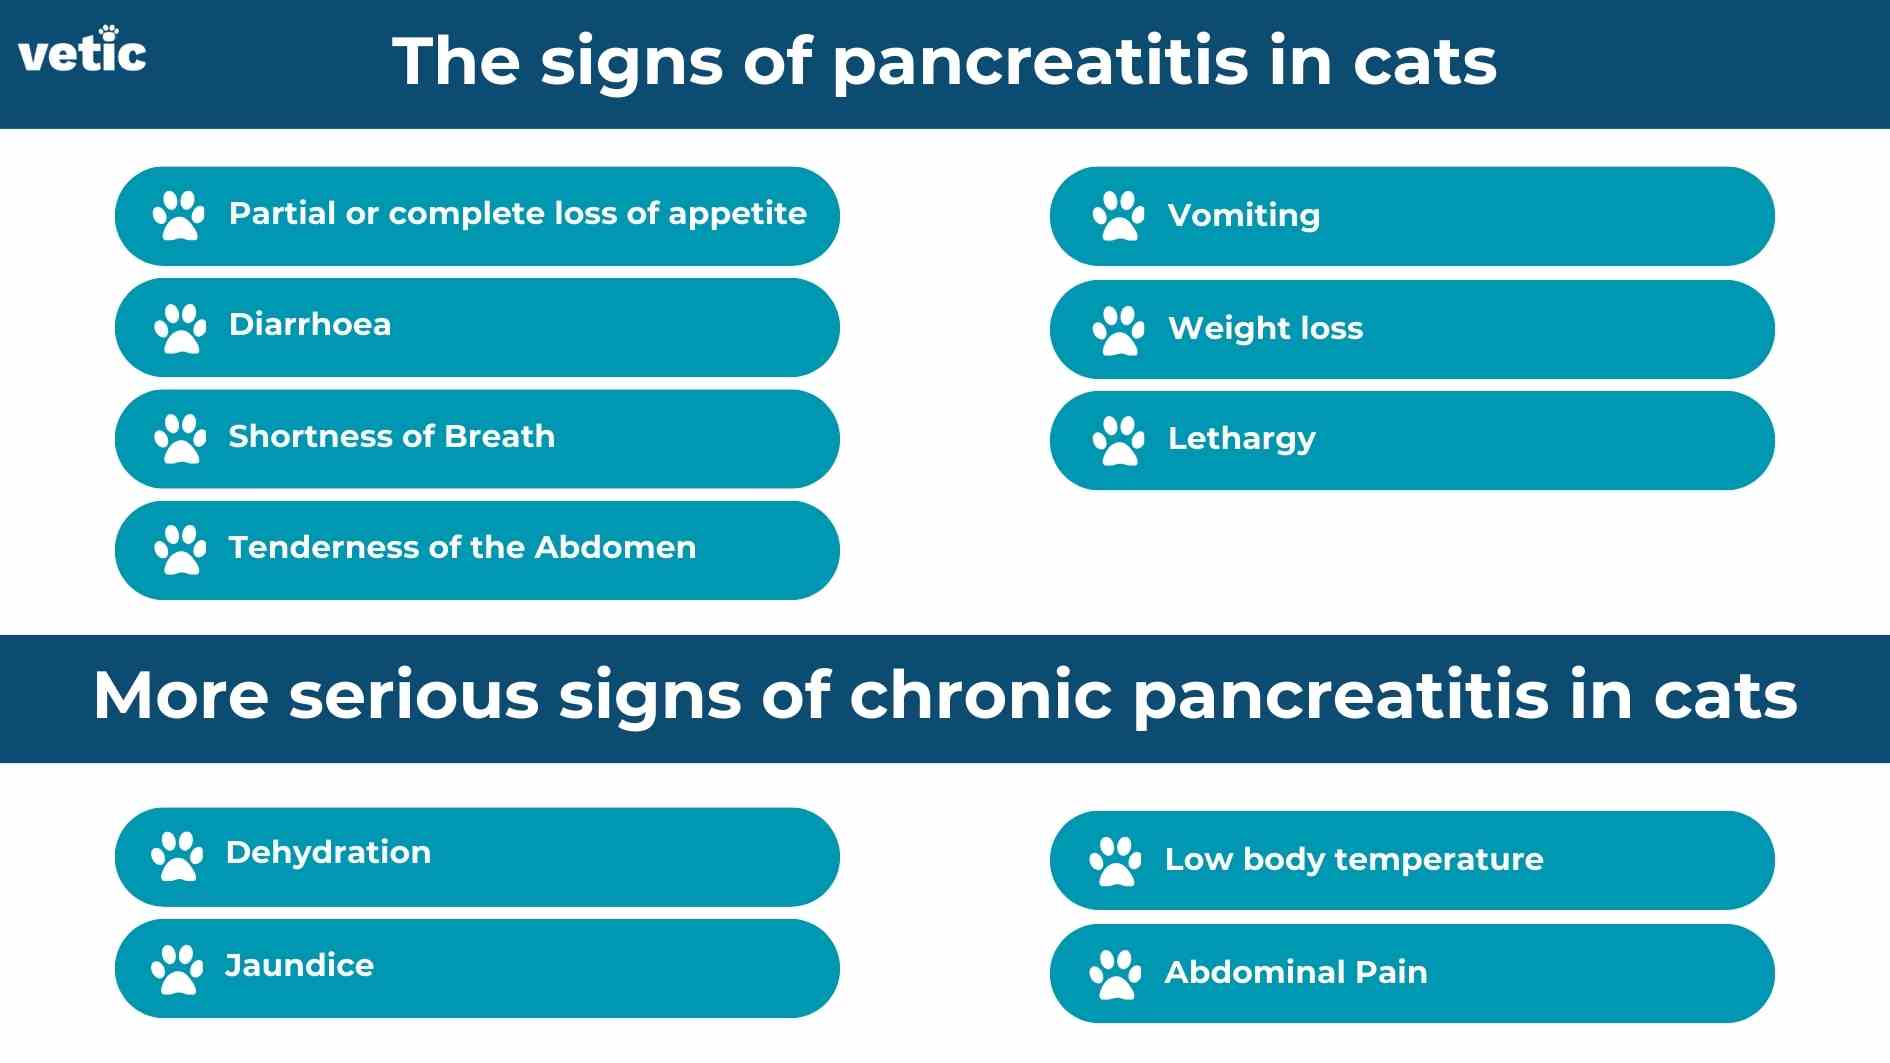 infographic on the signs of pancreatitis in cats with the vetic logo. The signs of pancreatitis in cats Partial or complete loss of appetite Vomiting Diarrhoea Weight loss Shortness of Breath Lethargy Tenderness of the Abdomen More serious signs of chronic pancreatitis in cats Dehydration Low body temperature Jaundice Abdominal Pain